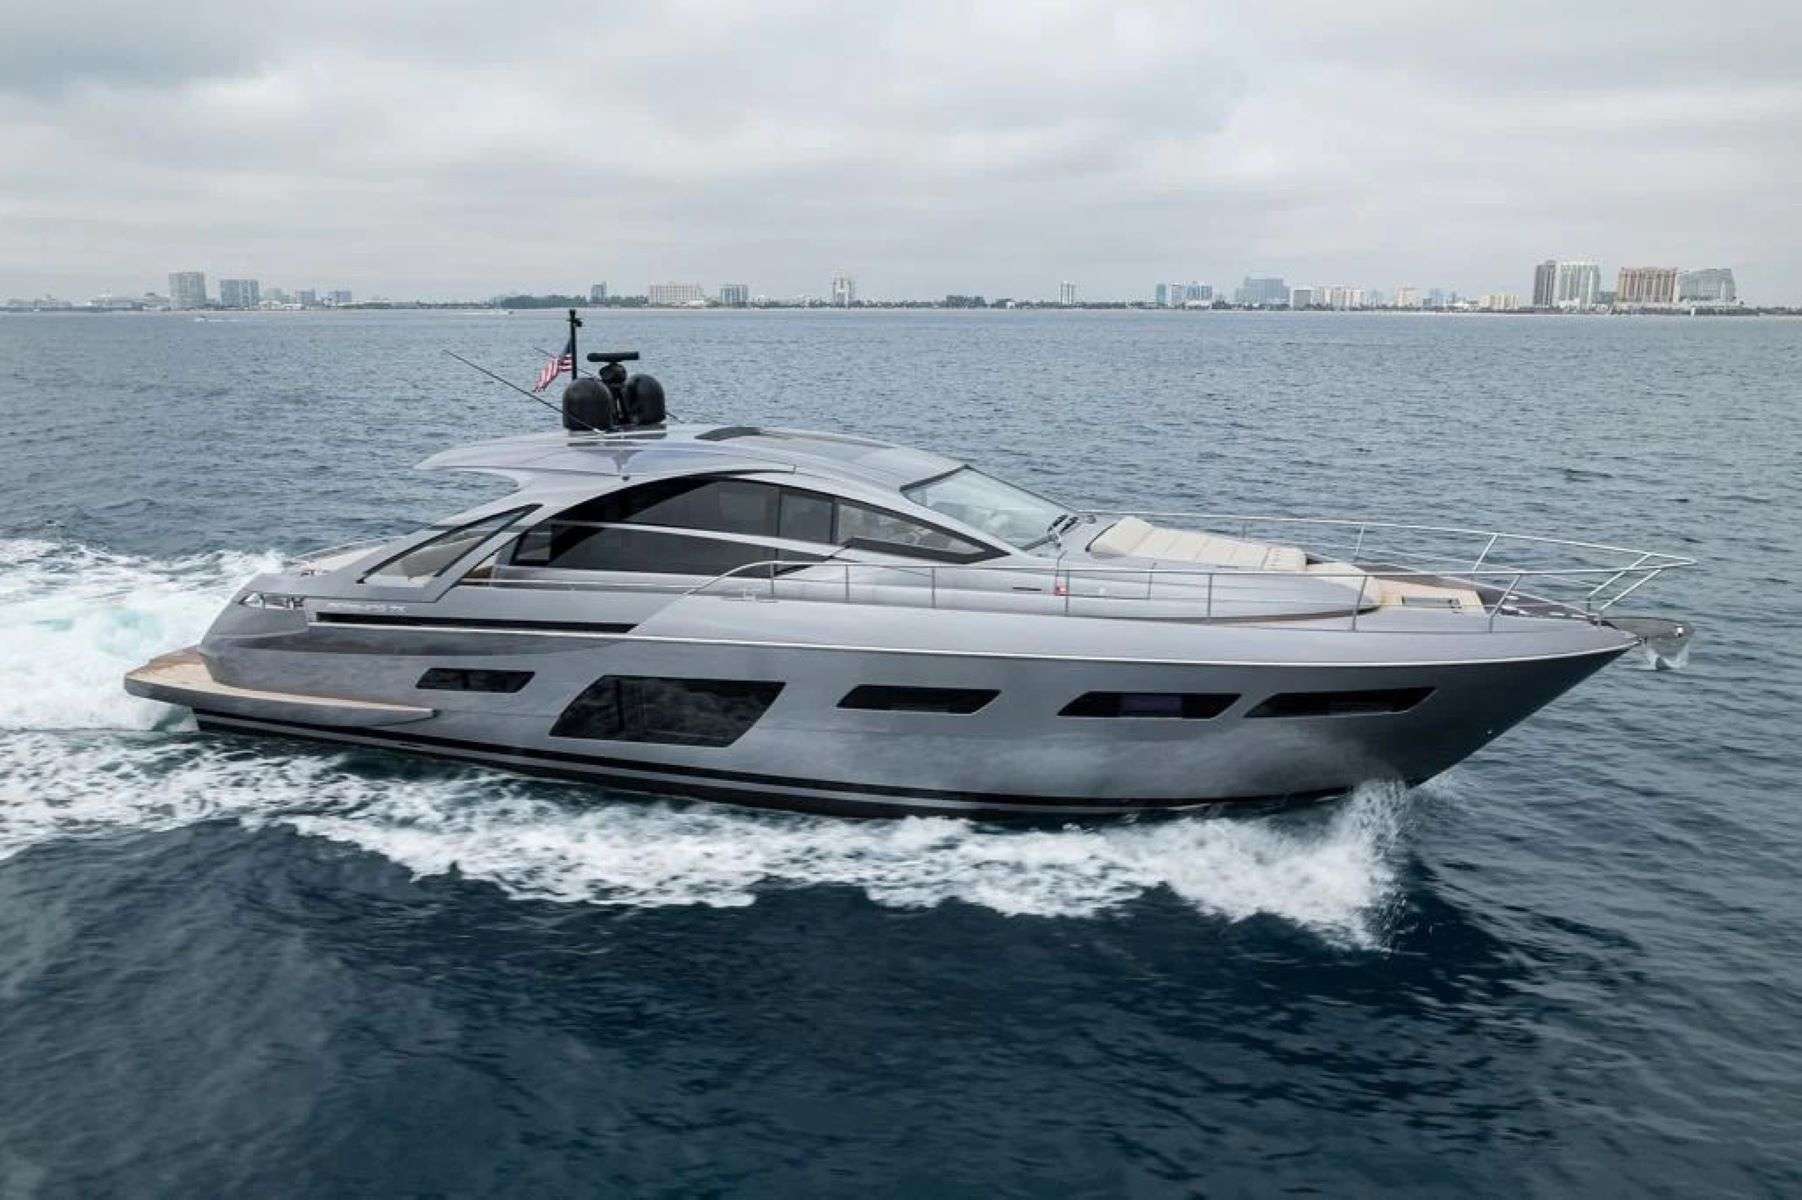 Amici - Yacht Charter Miami & Boat hire in Summer: USA - New England | Winter: USA - Florida East Coast 1